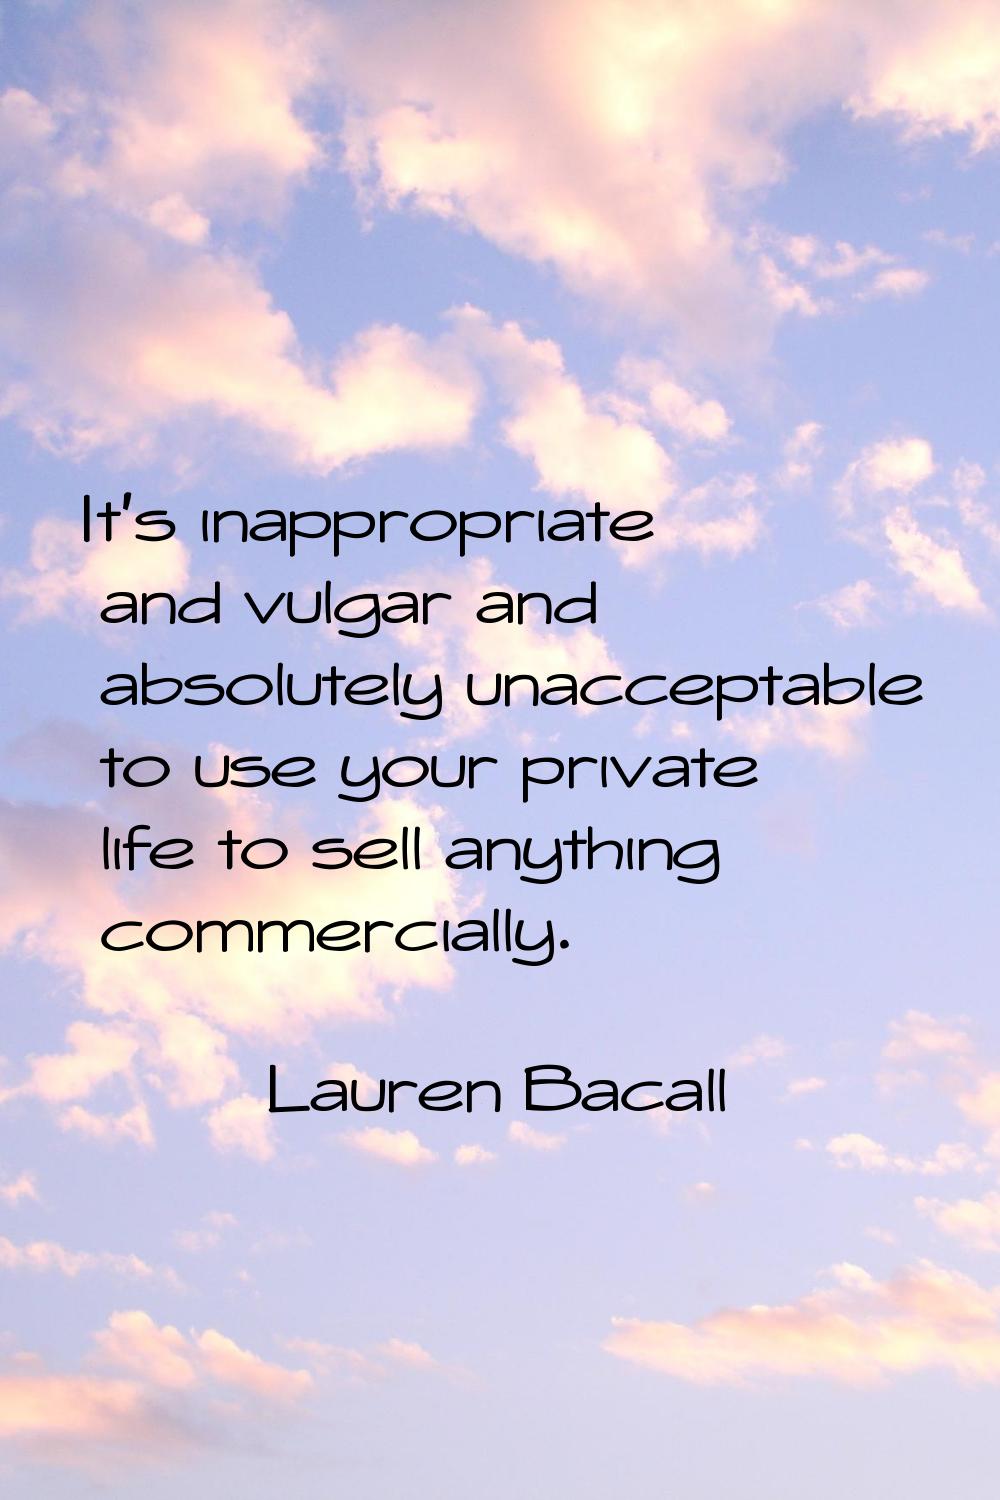 It's inappropriate and vulgar and absolutely unacceptable to use your private life to sell anything